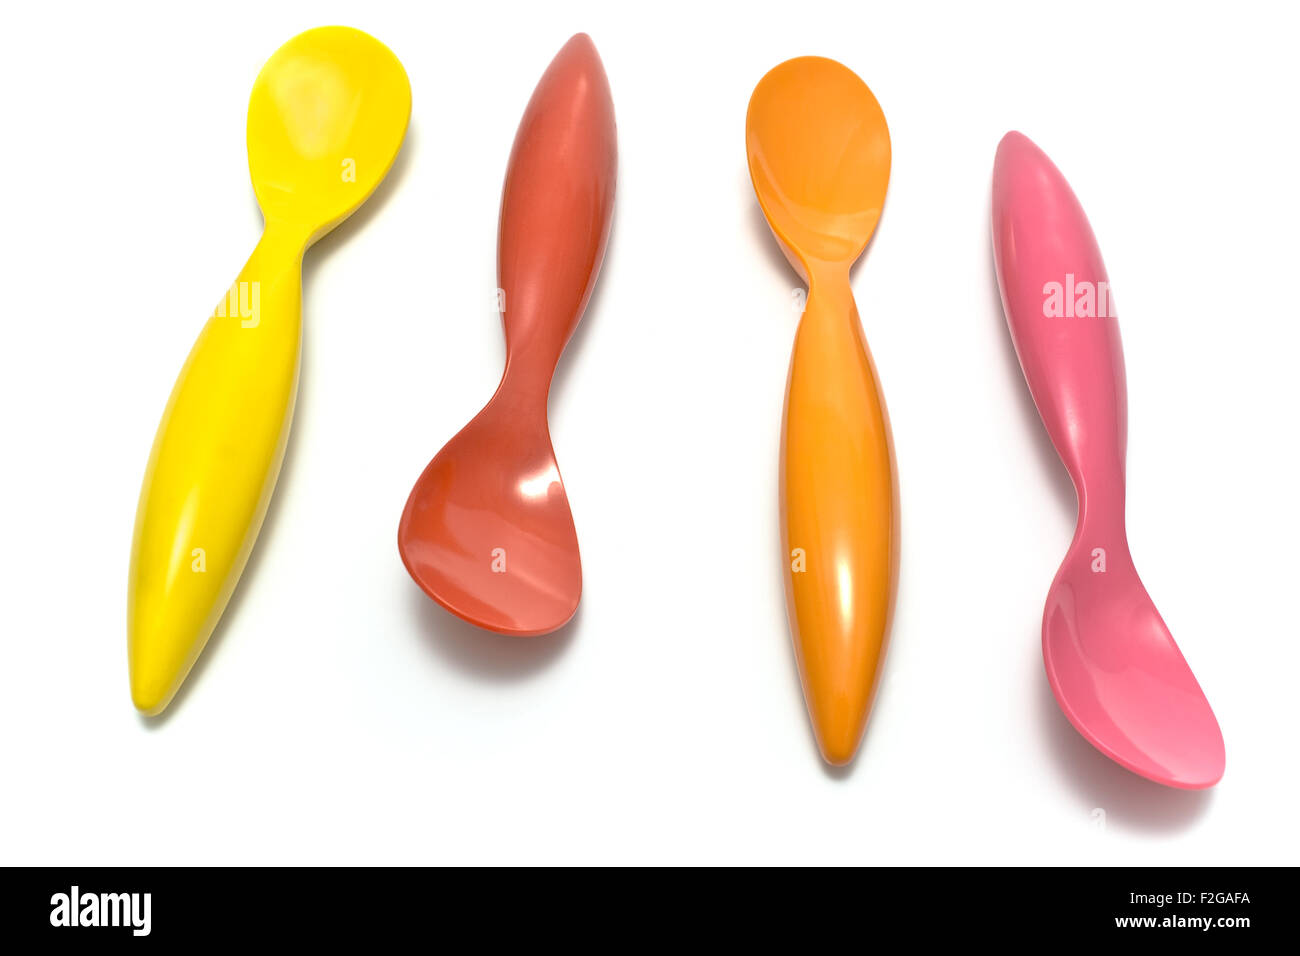 Colorful spoons isolated on white Stock Photo